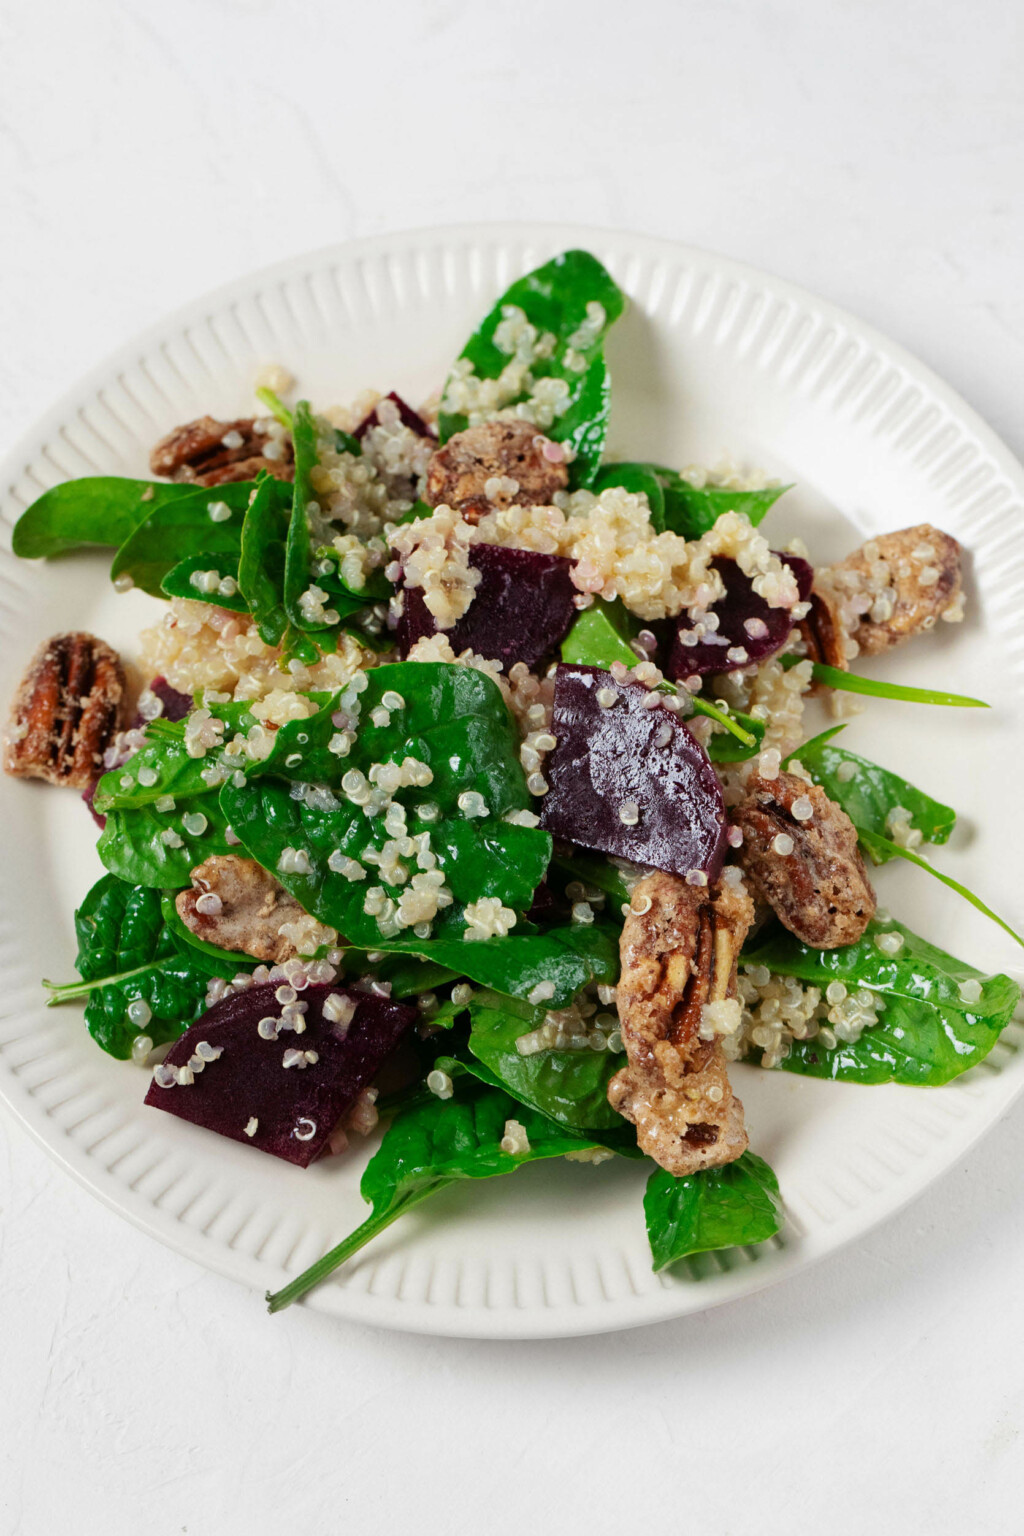 An overhead image of a round, rimmed white plate, which is serving a vegan quinoa and beet salad with crispy pecans.